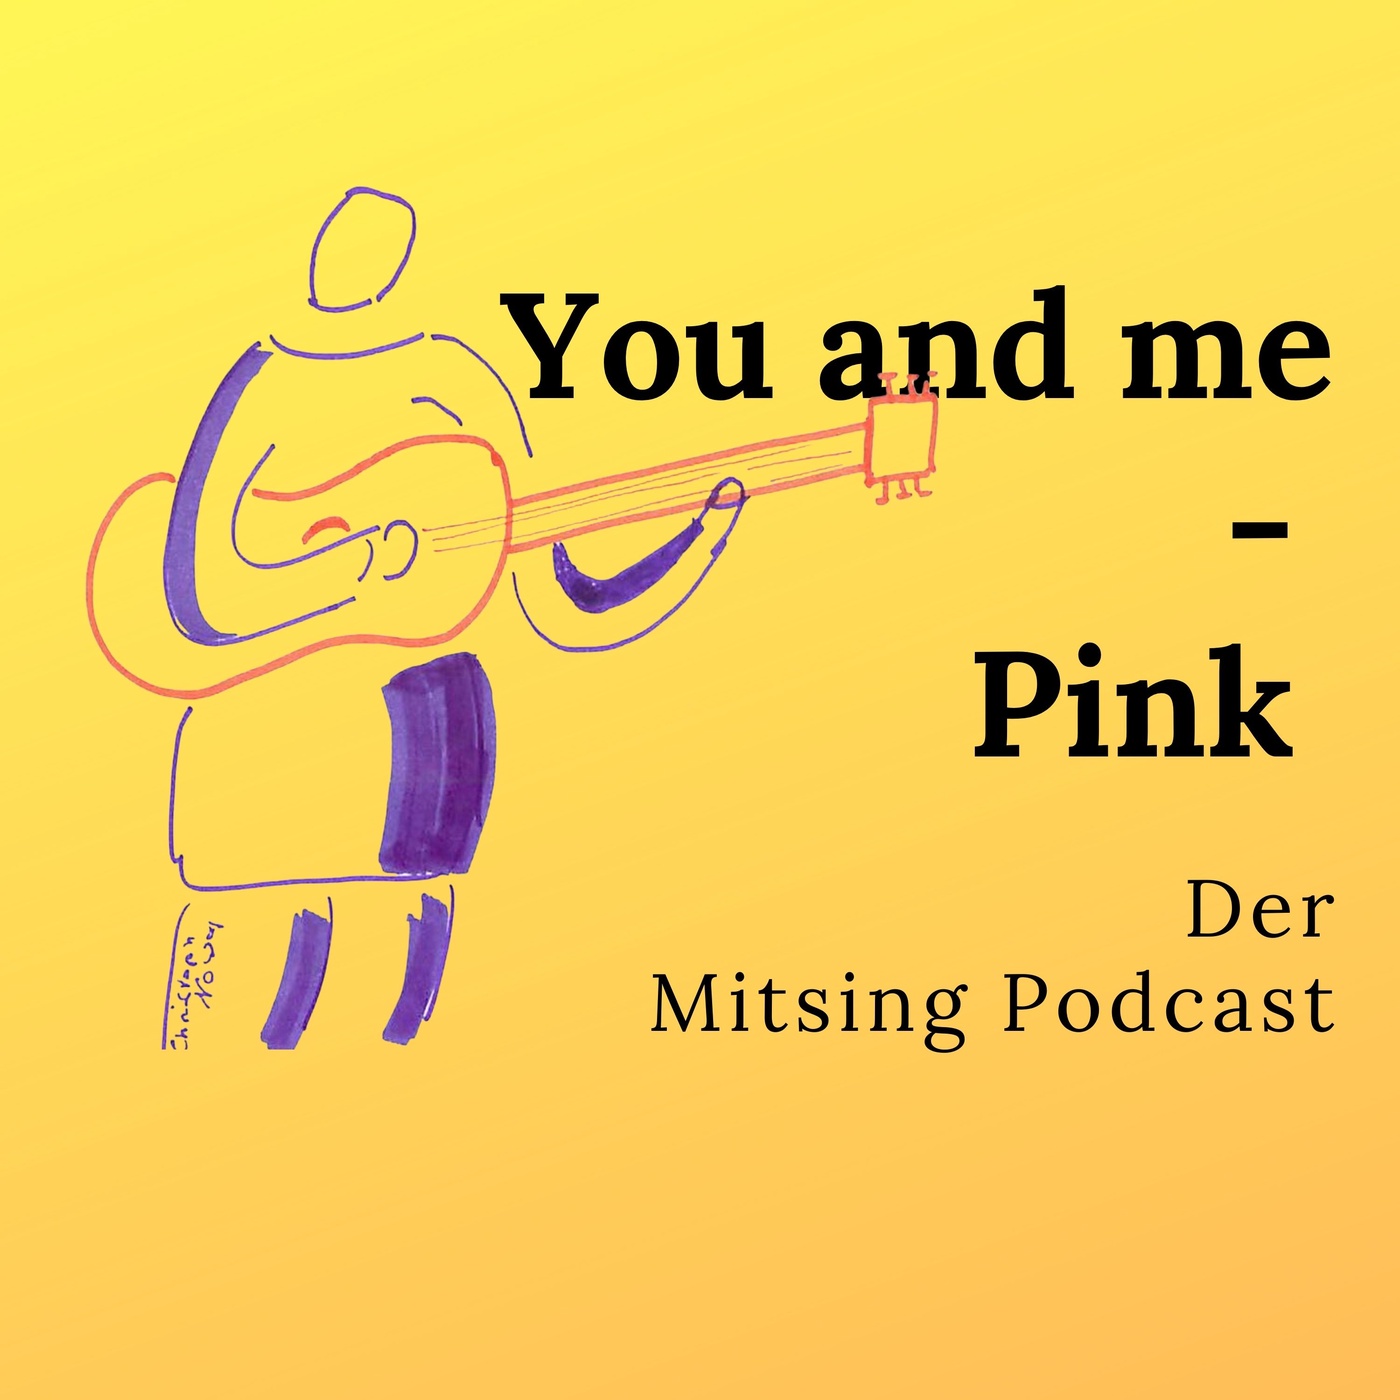 You and me von Pink